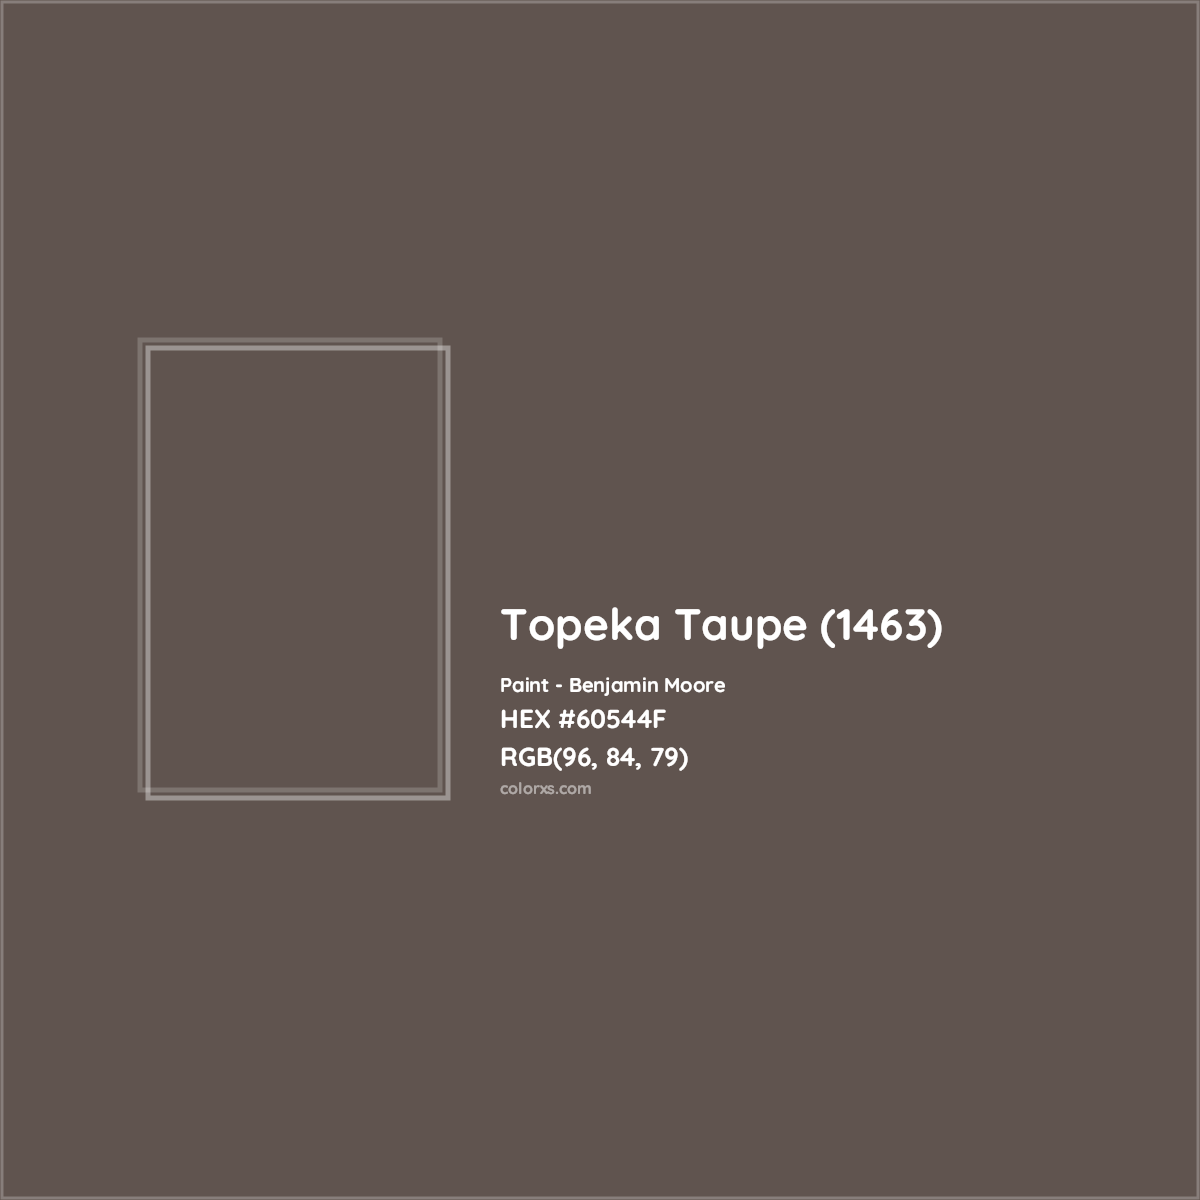 HEX #60544F Topeka Taupe (1463) Paint Benjamin Moore - Color Code